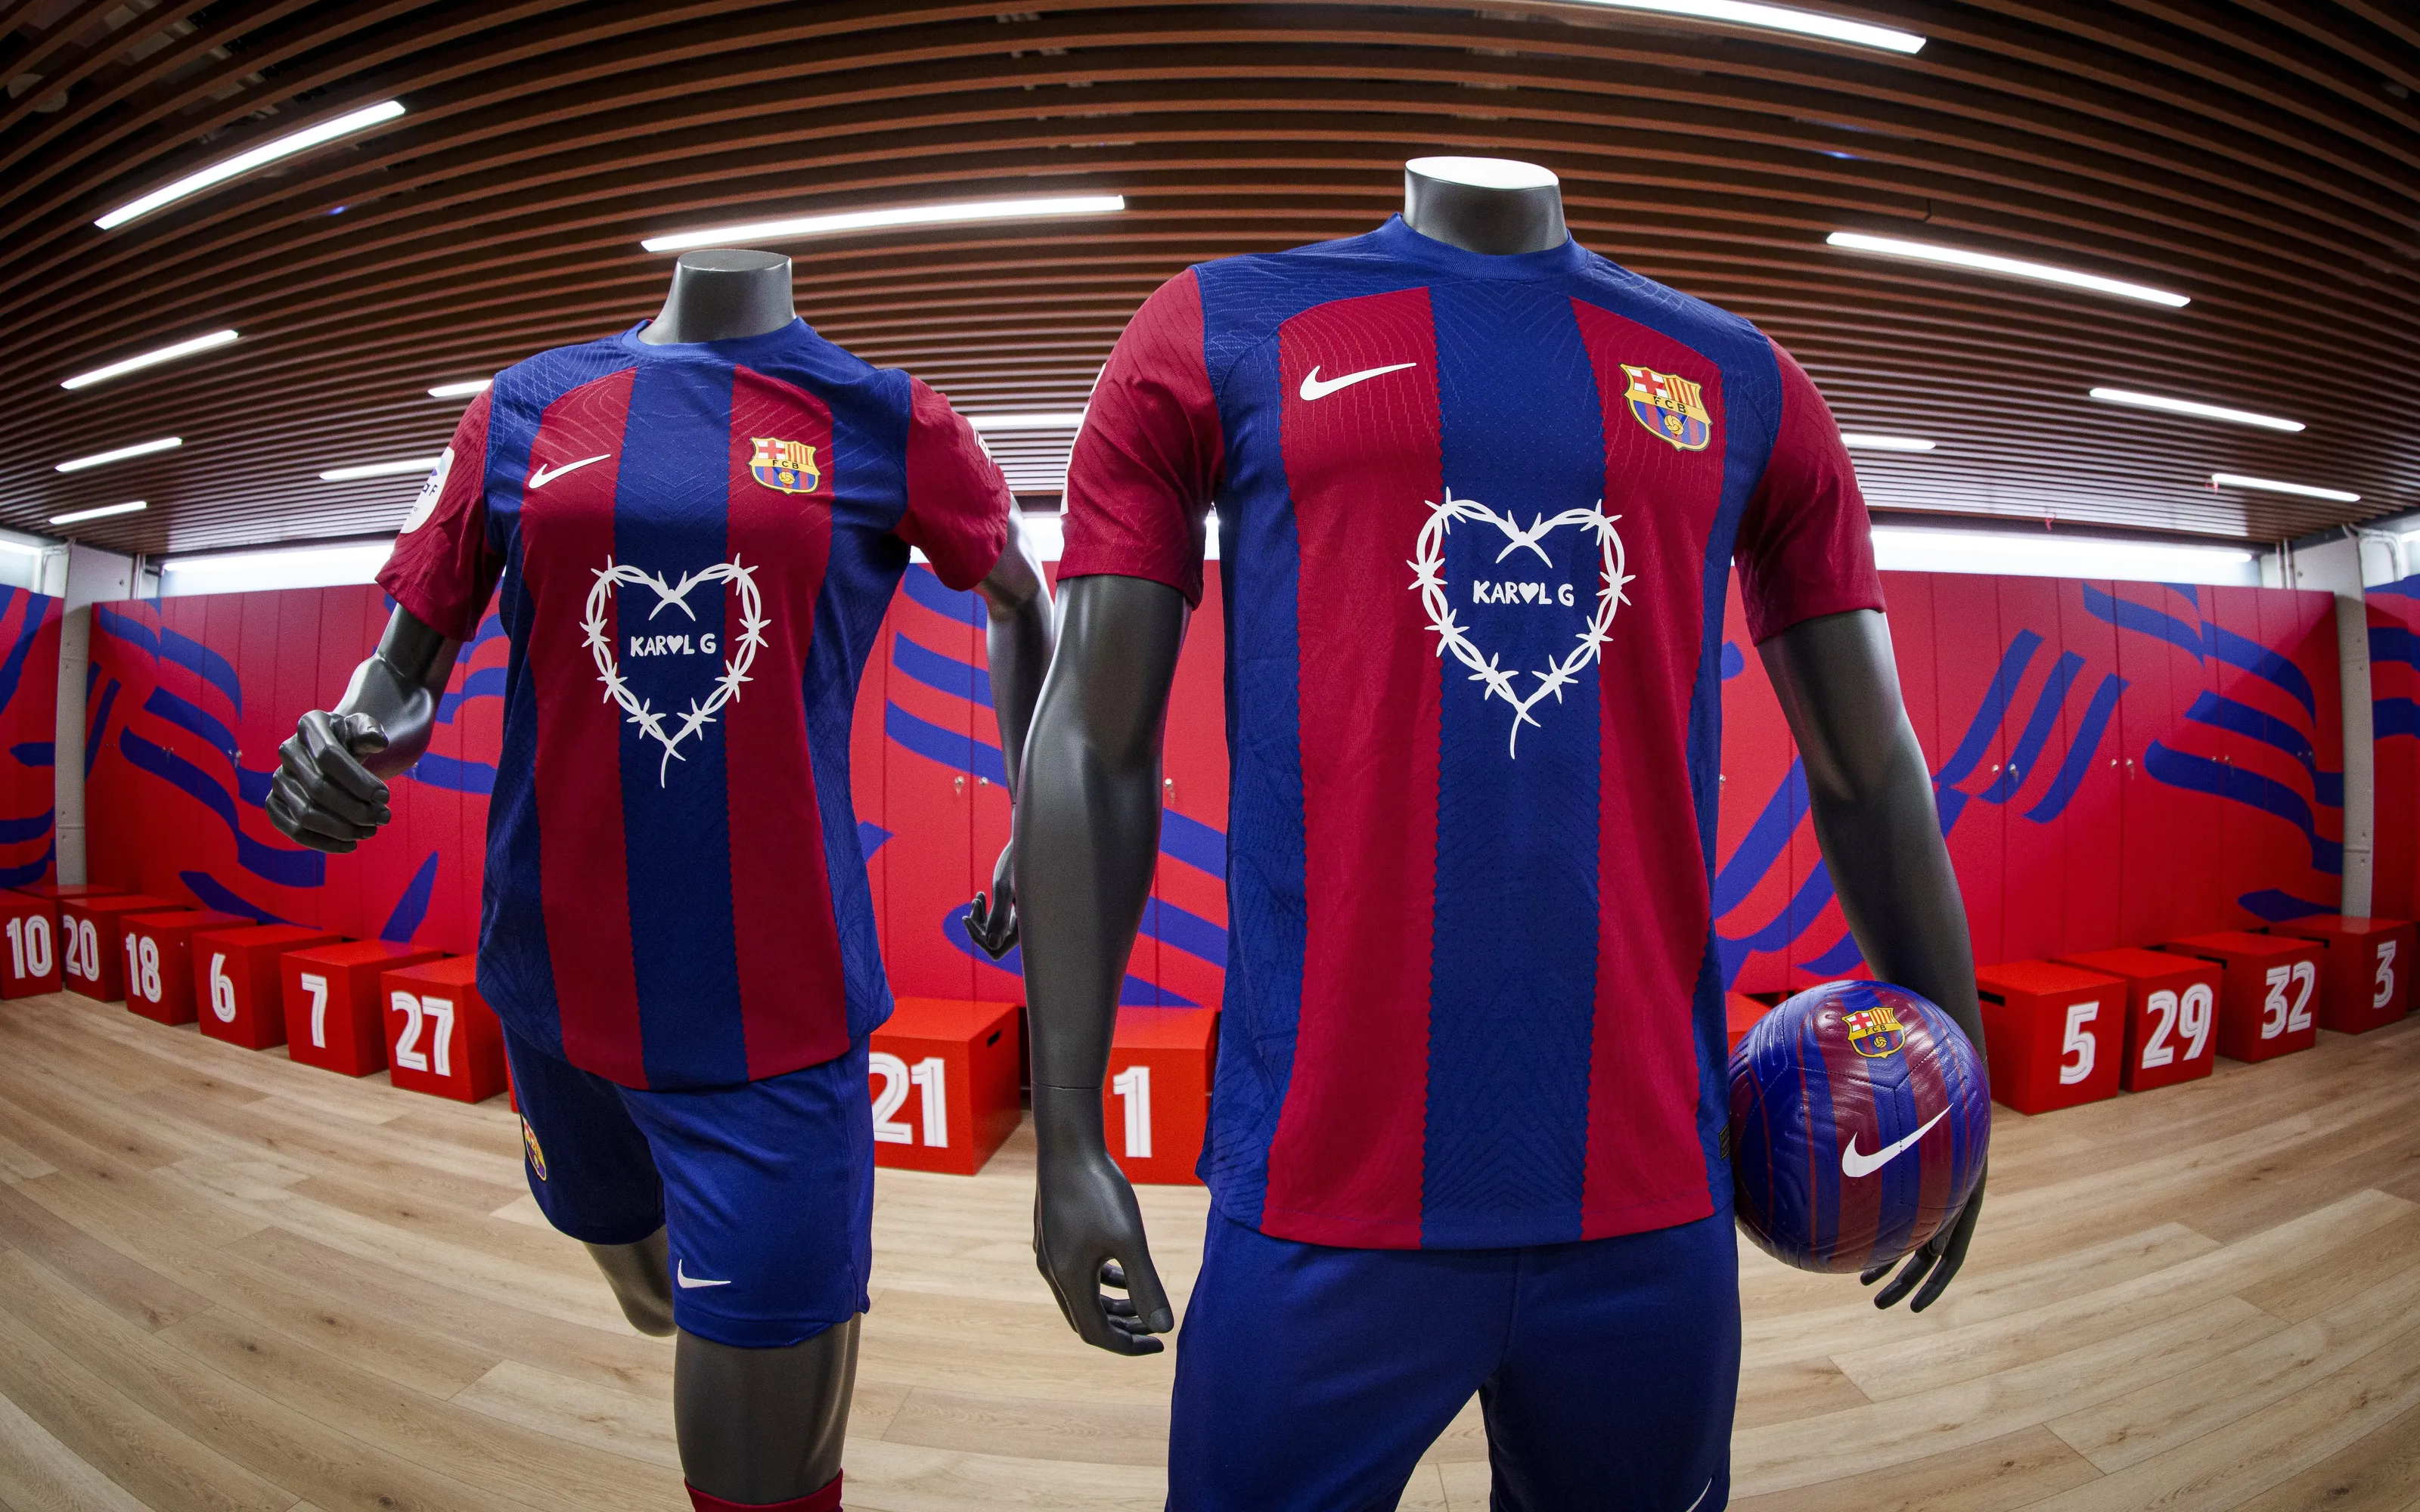 The exclusive edition of the FC Barcelona jersey for El Clásico against Real Madrid on April 21, 2024, features Karol G's logo